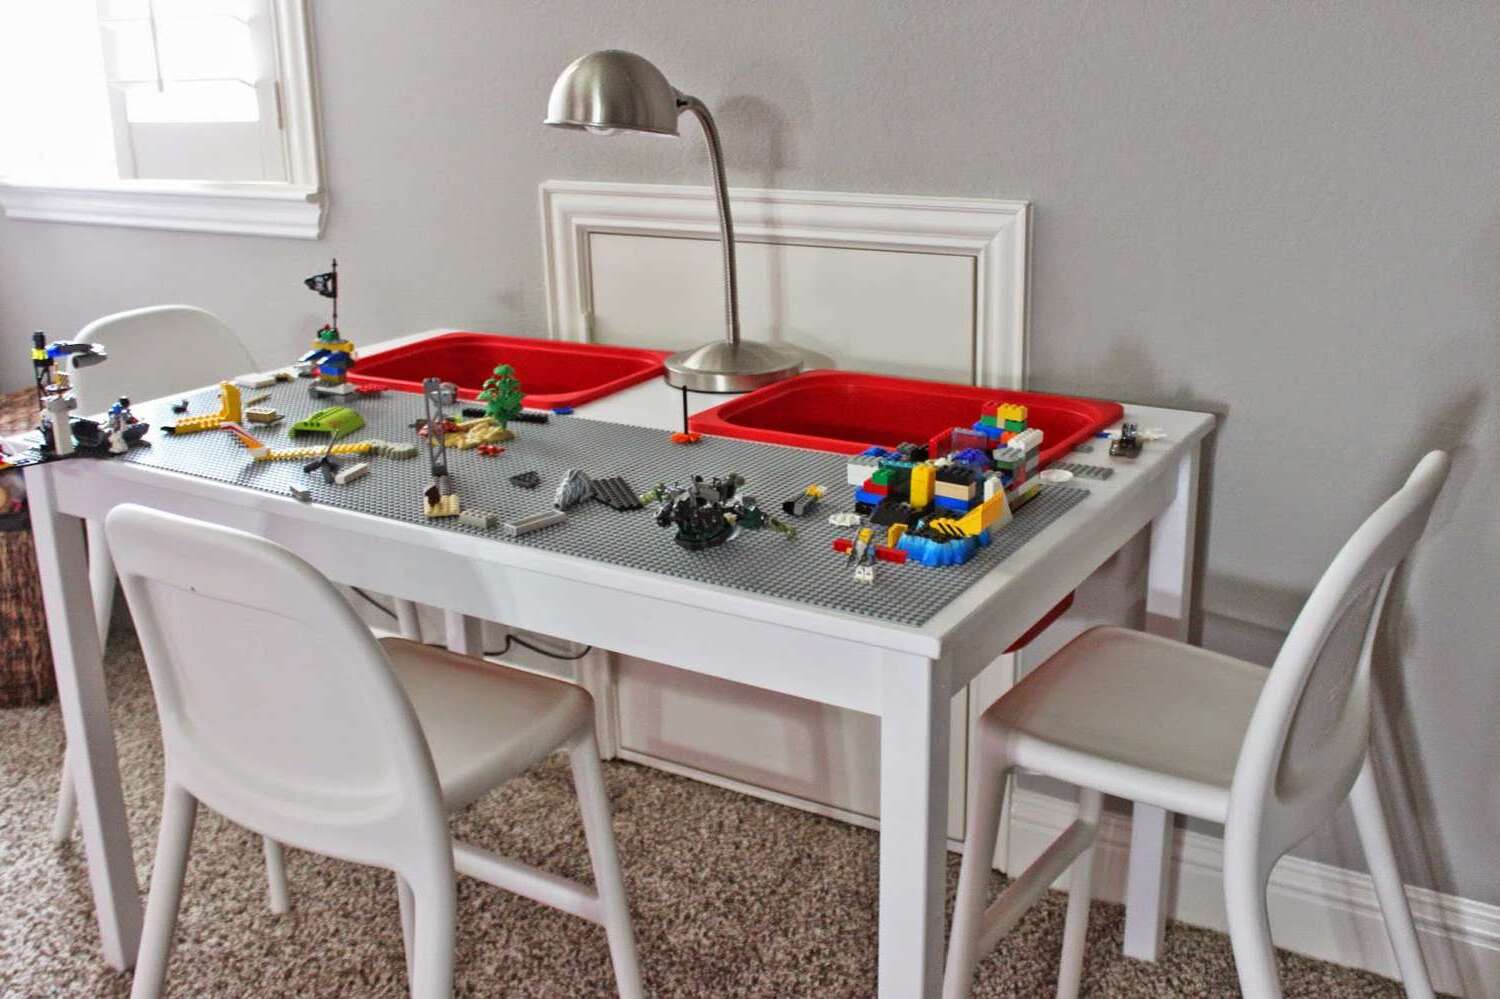 Lego Table DIY: How To Create Your Own Lego Play Station